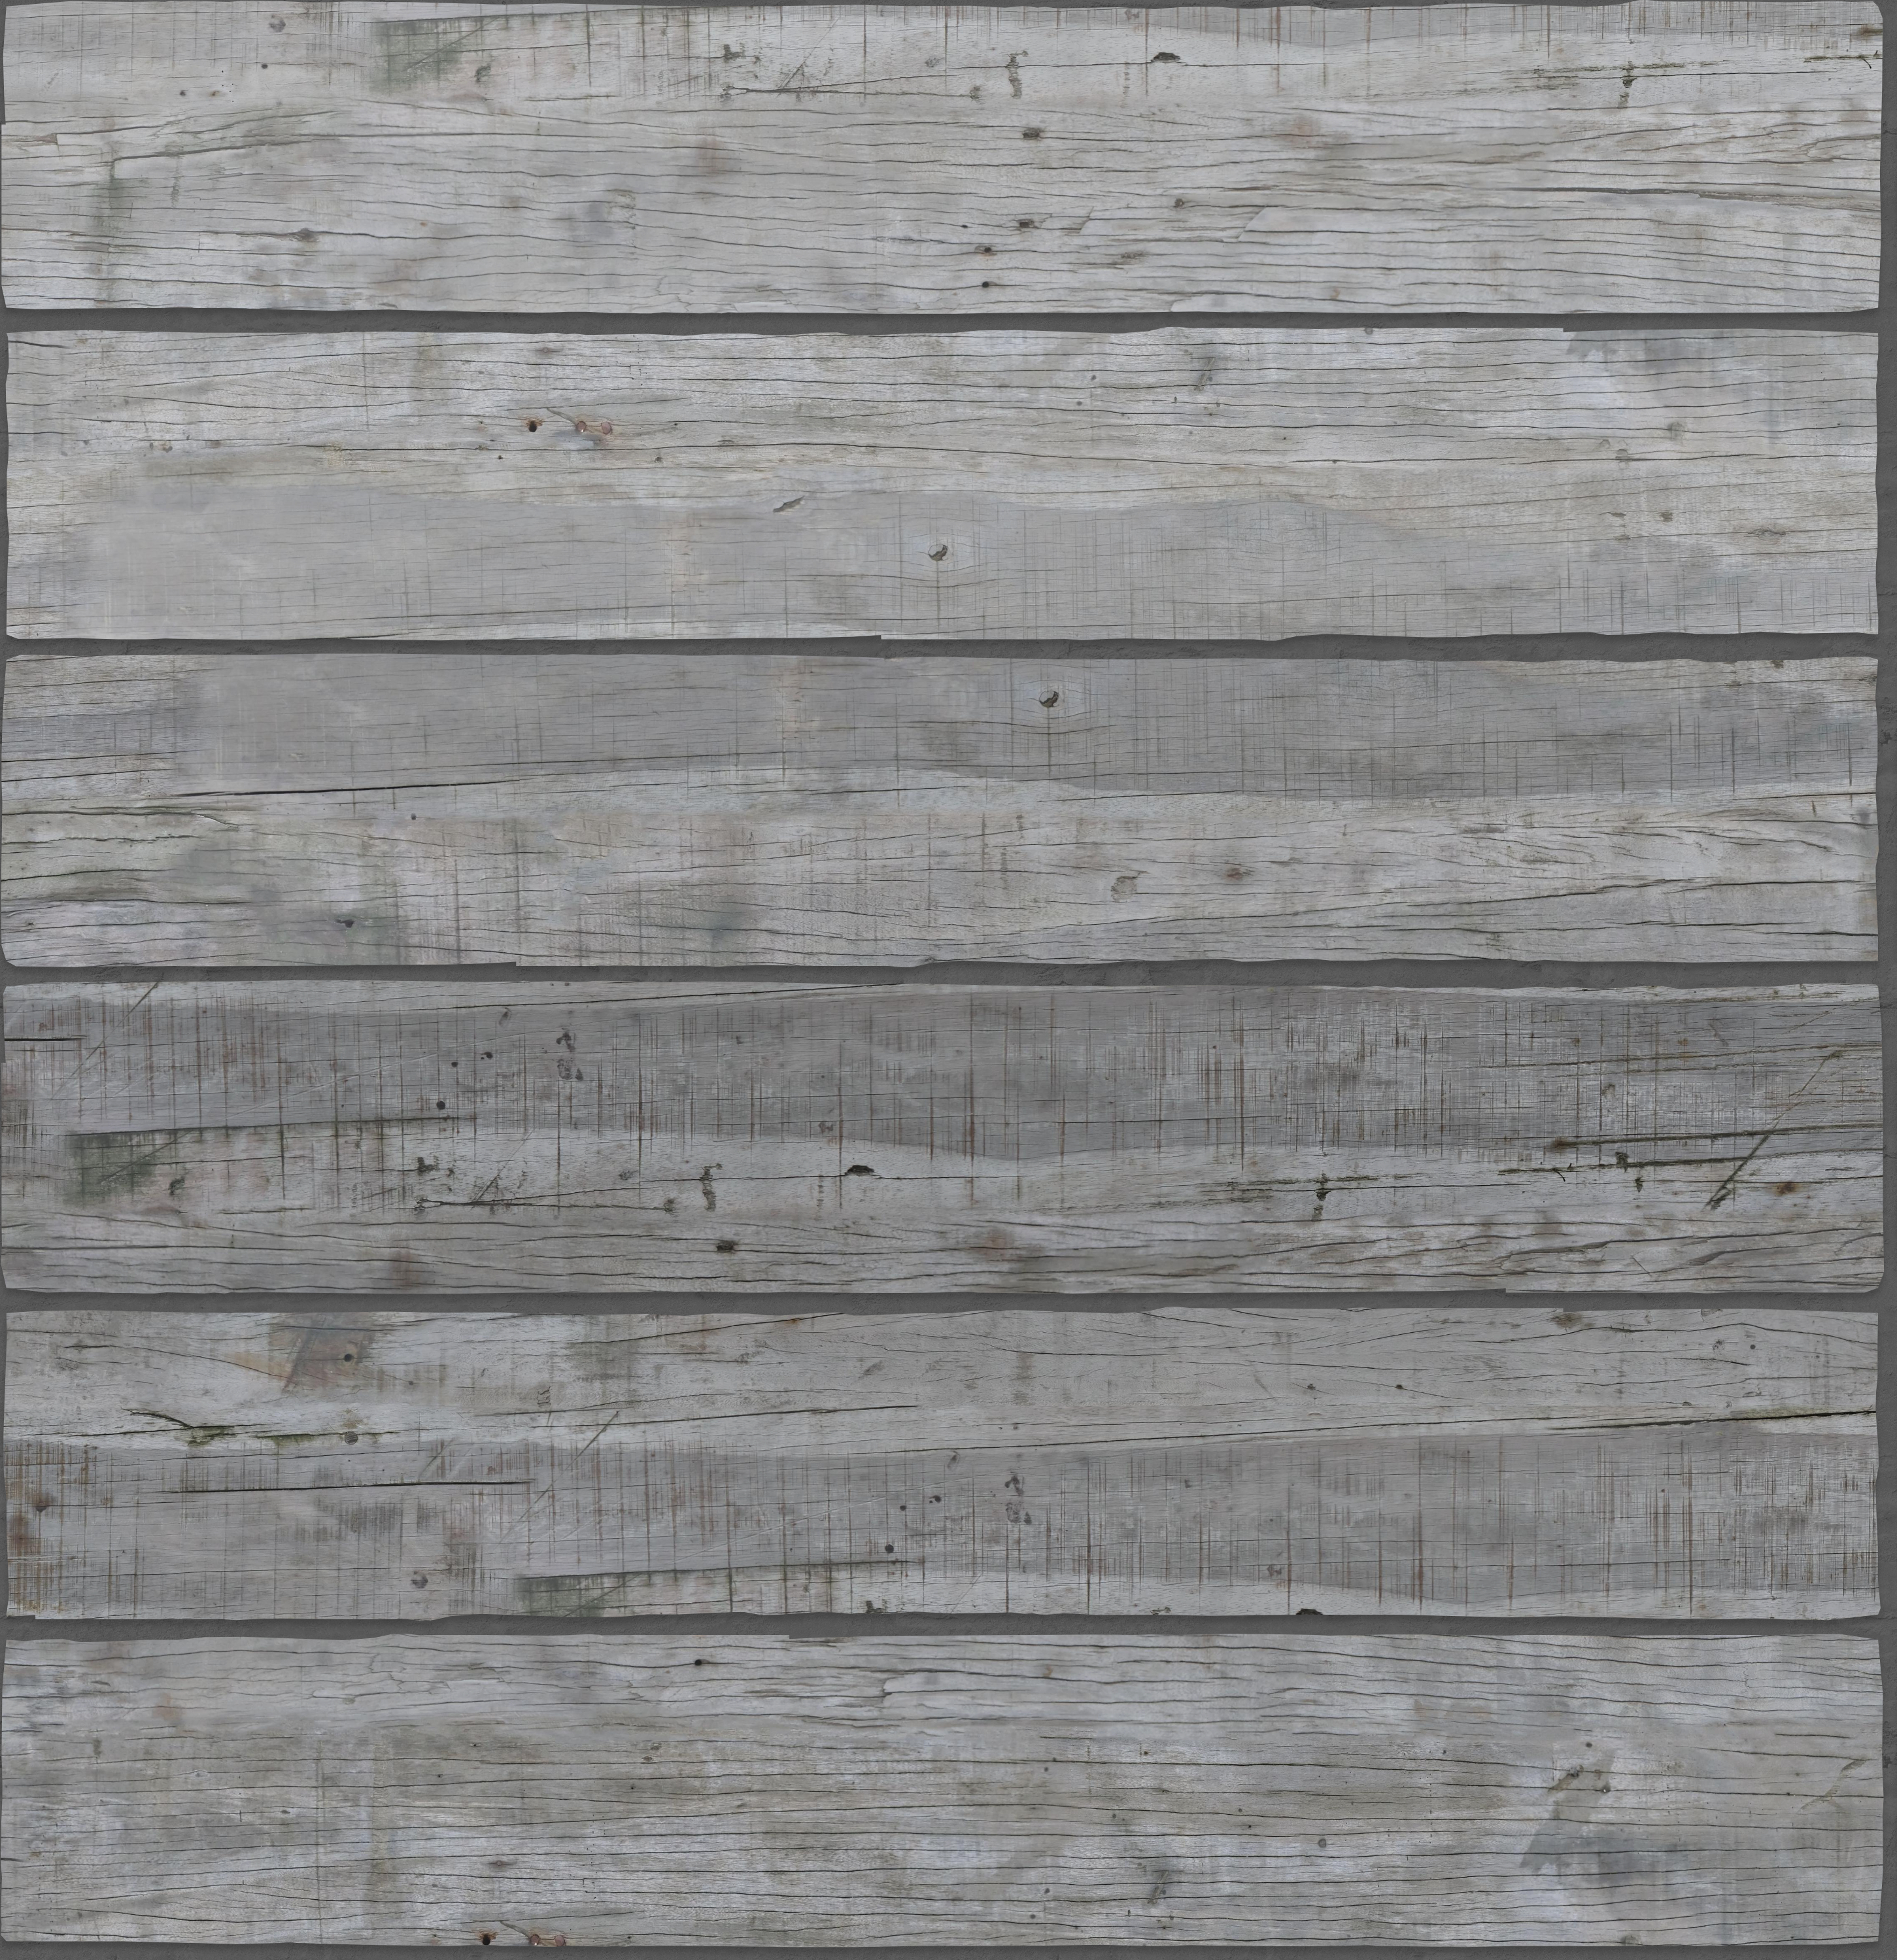 A seamless wood texture with railway sleeper boards arranged in a Stack pattern